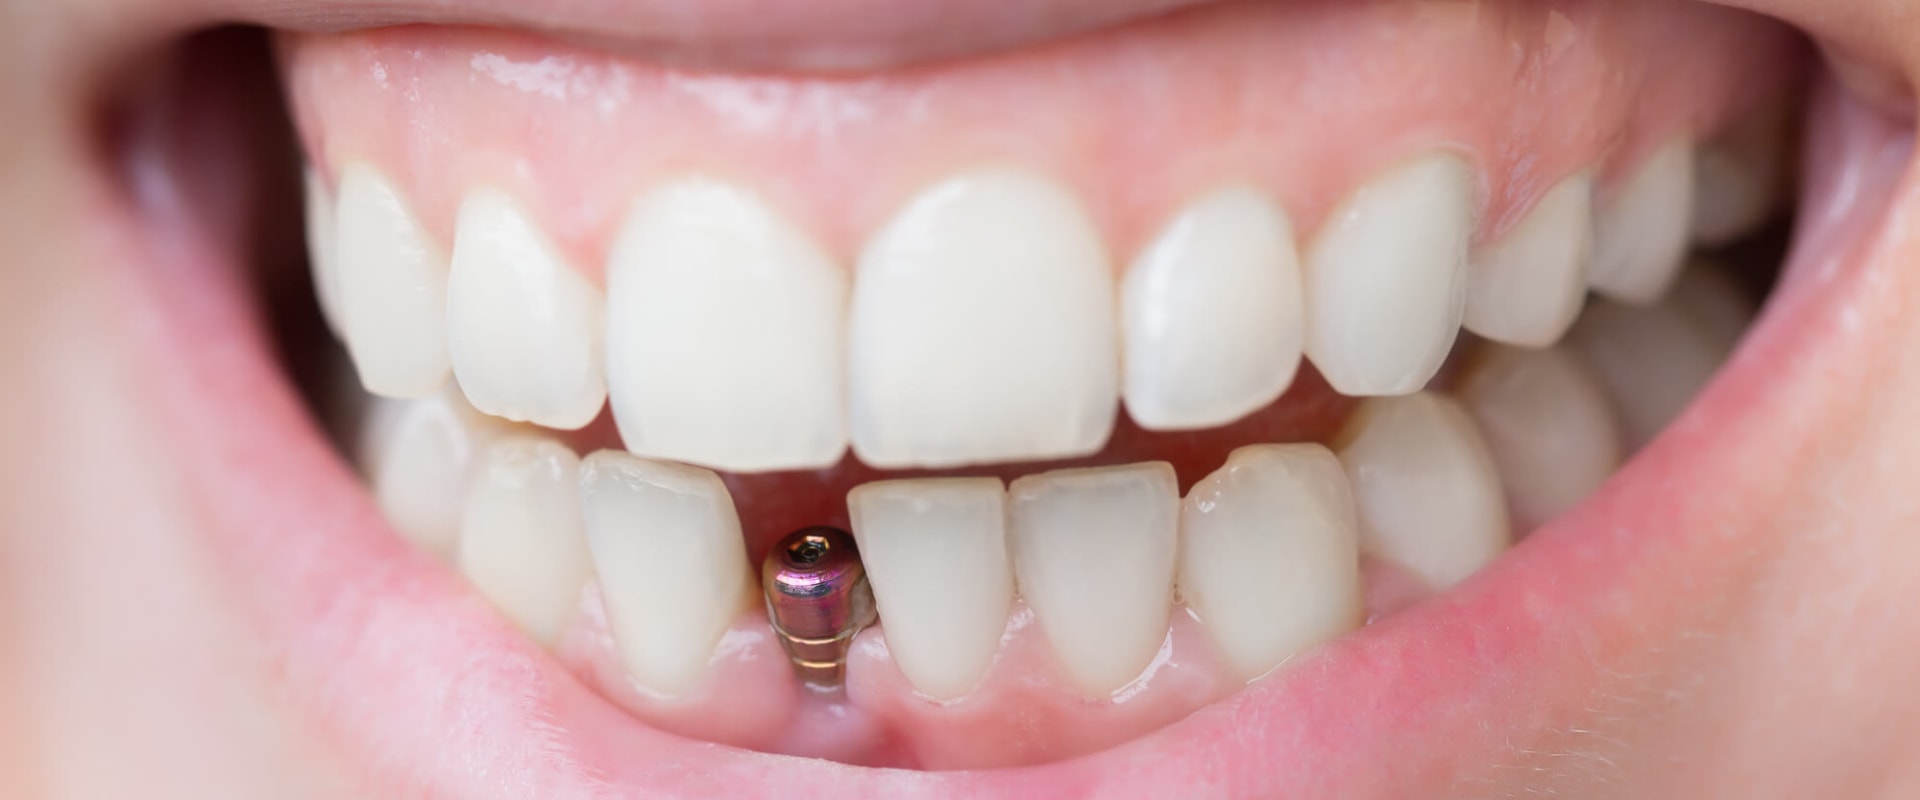 Where is the best place in the world to get dental implants?